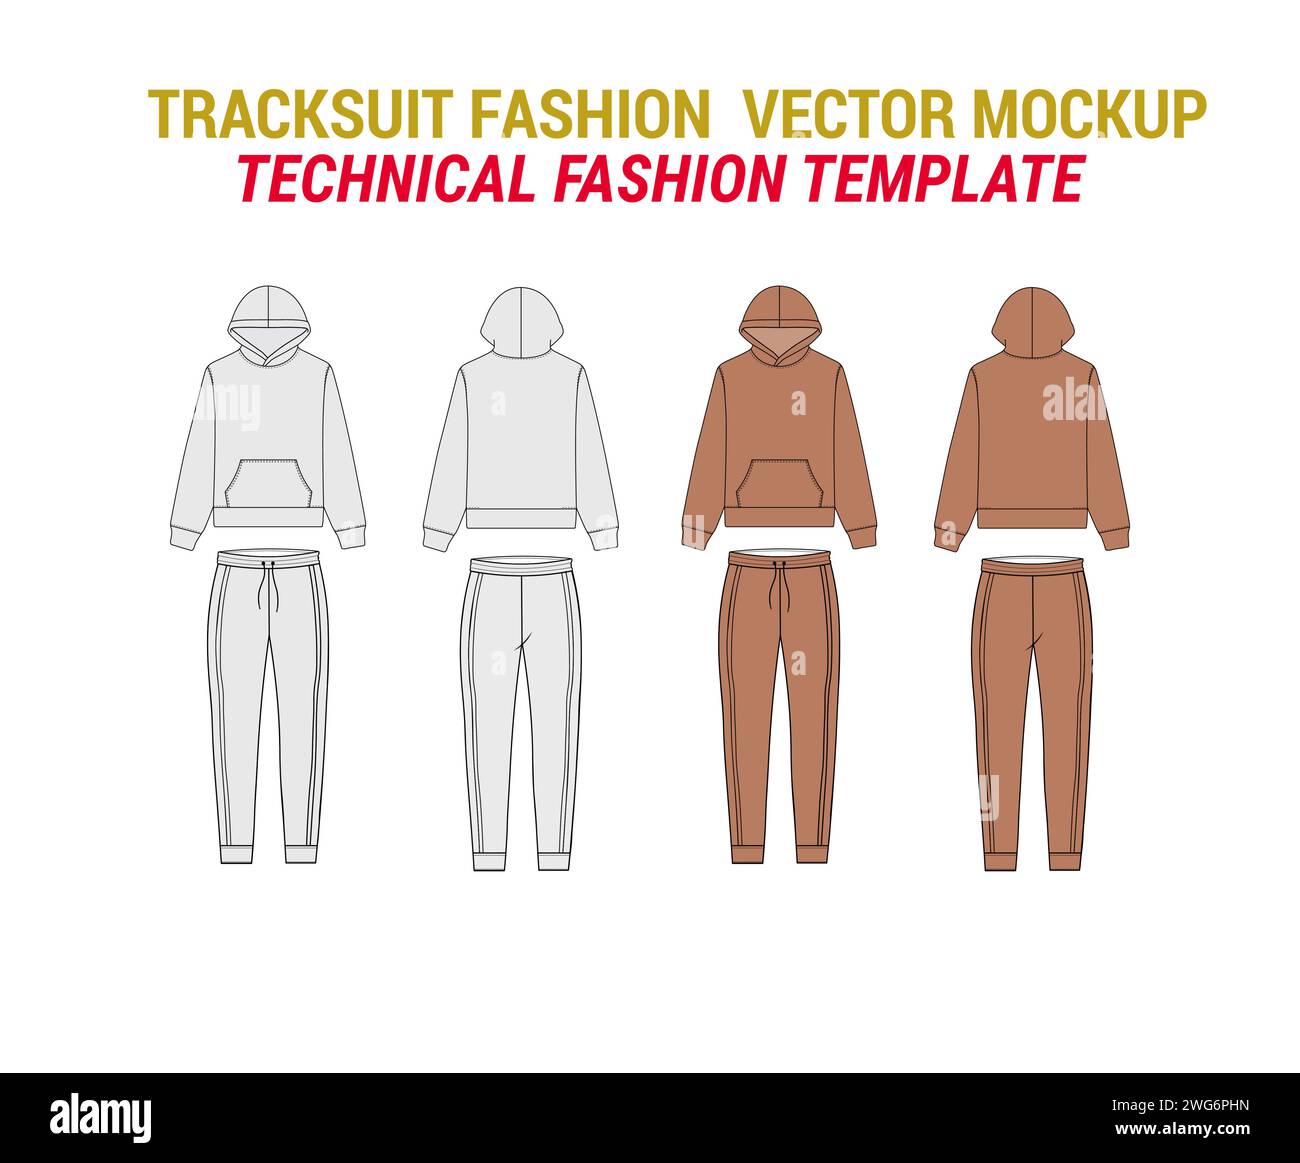 Tracksuit Technical Drawing Illustration Tracksuit Fashion Flat Vector Mockup Template Hoodie Joggers Fashion Illustration Sweatshirts with Sweatpants Stock Vector